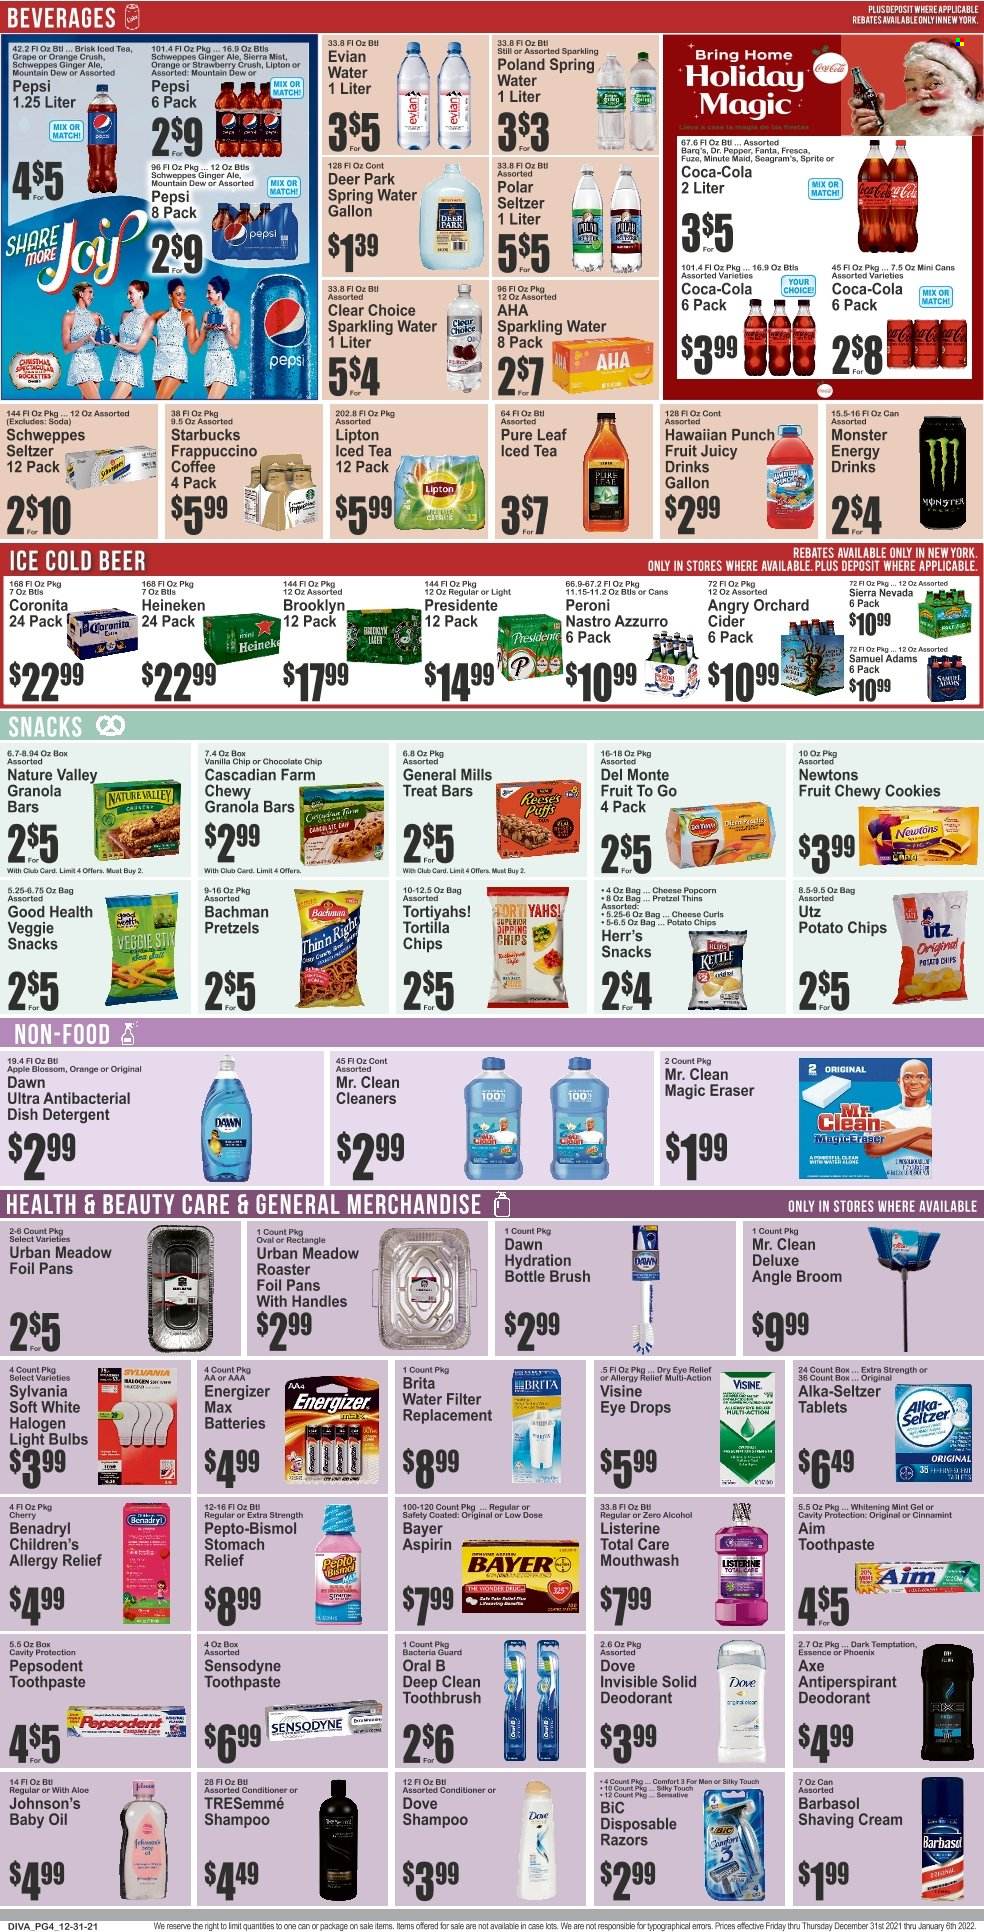 thumbnail - Key Food Flyer - 12/31/2021 - 01/06/2022 - Sales products - pretzels, puffs, oranges, cheese, Blossom, cookies, snack, tortilla chips, potato chips, chips, Thins, popcorn, granola bar, Nature Valley, oil, Coca-Cola, ginger ale, Mountain Dew, Schweppes, Sprite, Pepsi, Fanta, energy drink, Monster, Lipton, ice tea, Dr. Pepper, Monster Energy, Sierra Mist, fruit punch, Evian, Pure Leaf, coffee, Starbucks, frappuccino, alcohol, cider, beer, Heineken, Peroni, Johnson's, baby oil, Dove, detergent, shampoo, Listerine, toothbrush, Oral-B, toothpaste, Sensodyne, mouthwash, Pepsodent, conditioner, TRESemmé, anti-perspirant, deodorant, BIC, Barbasol, disposable razor, broom, angle broom, bottle brush, battery, bulb, Energizer, light bulb, Sylvania, water filter, Pepto-bismol, eye drops, Alka-seltzer, Low Dose, aspirin, Bayer, allergy relief. Page 4.